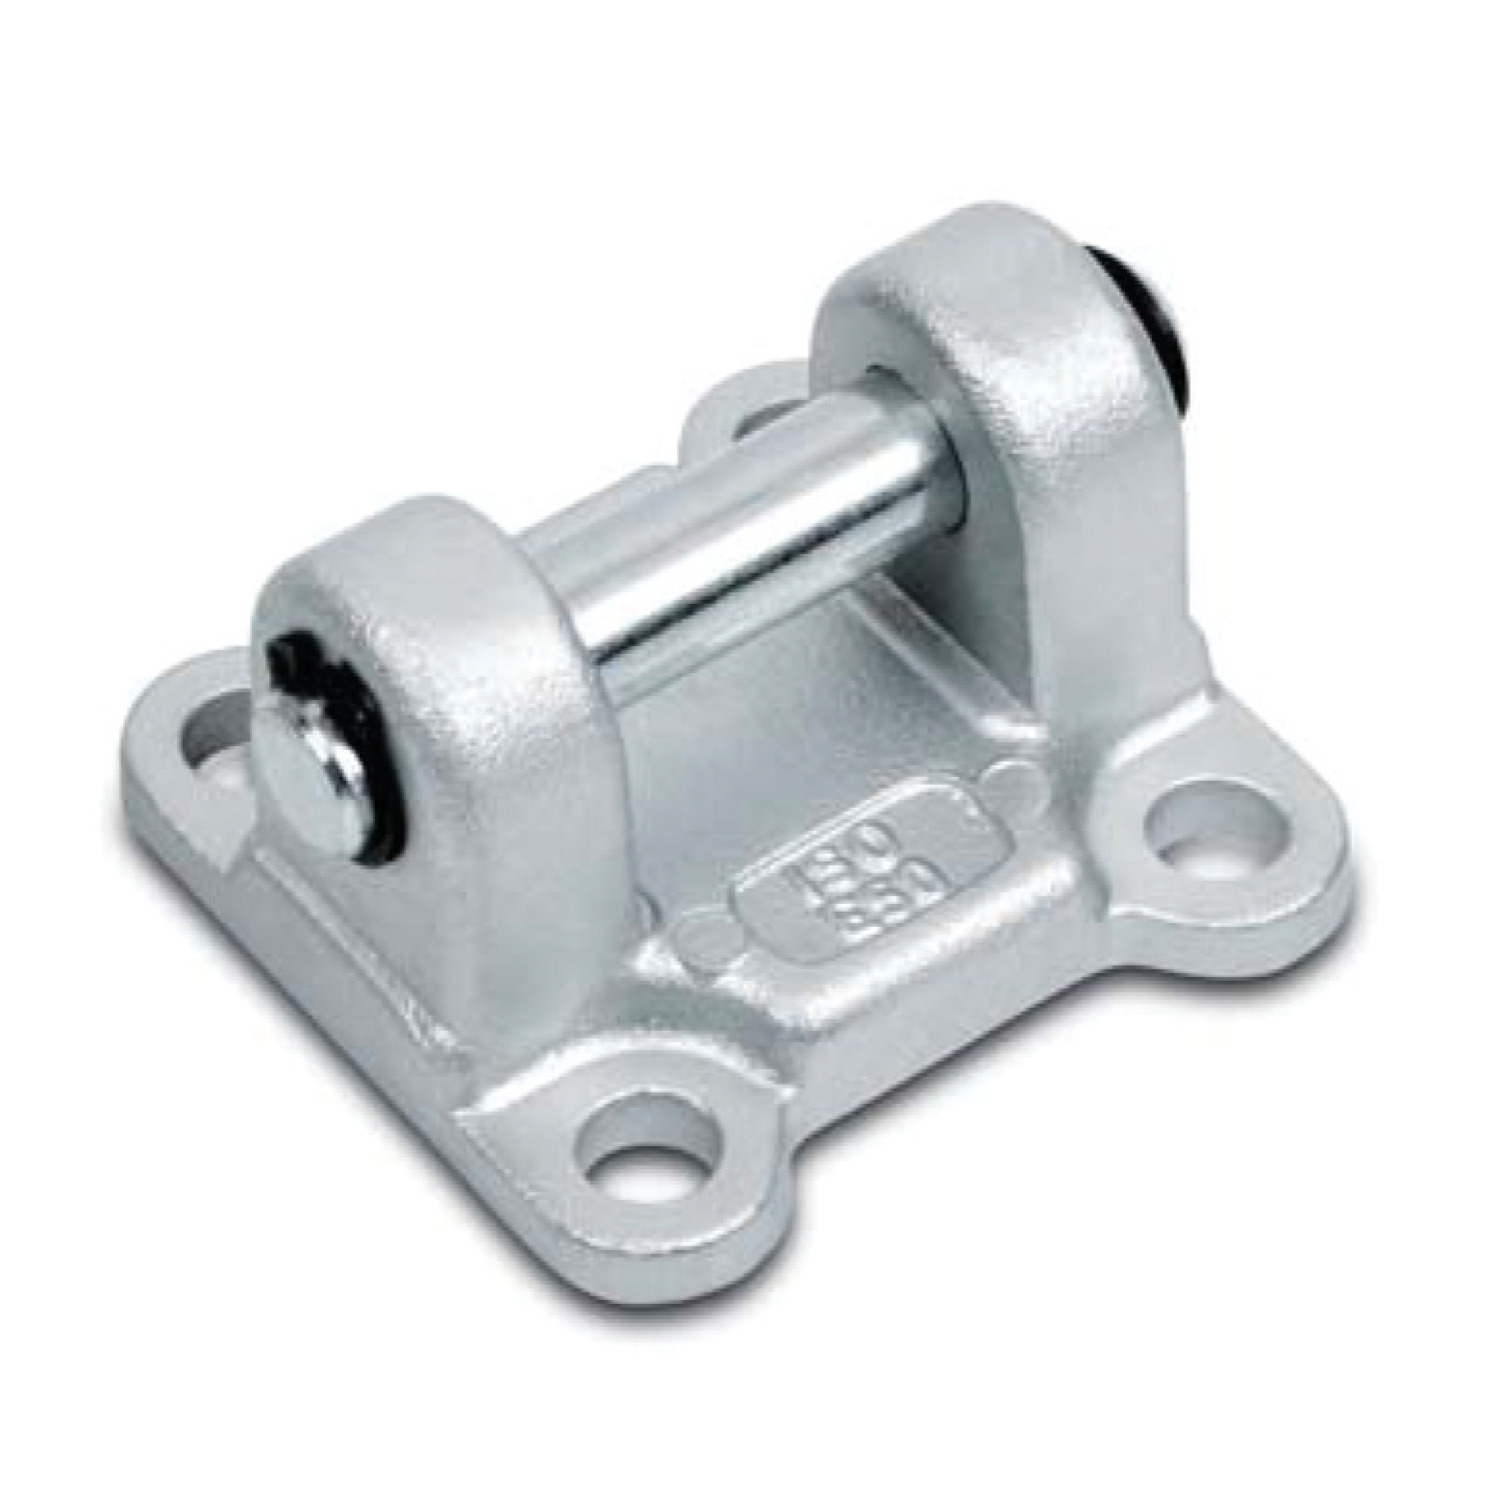 Product L4800, Air Cylinder Mounts - ISO Series swivel flange / 